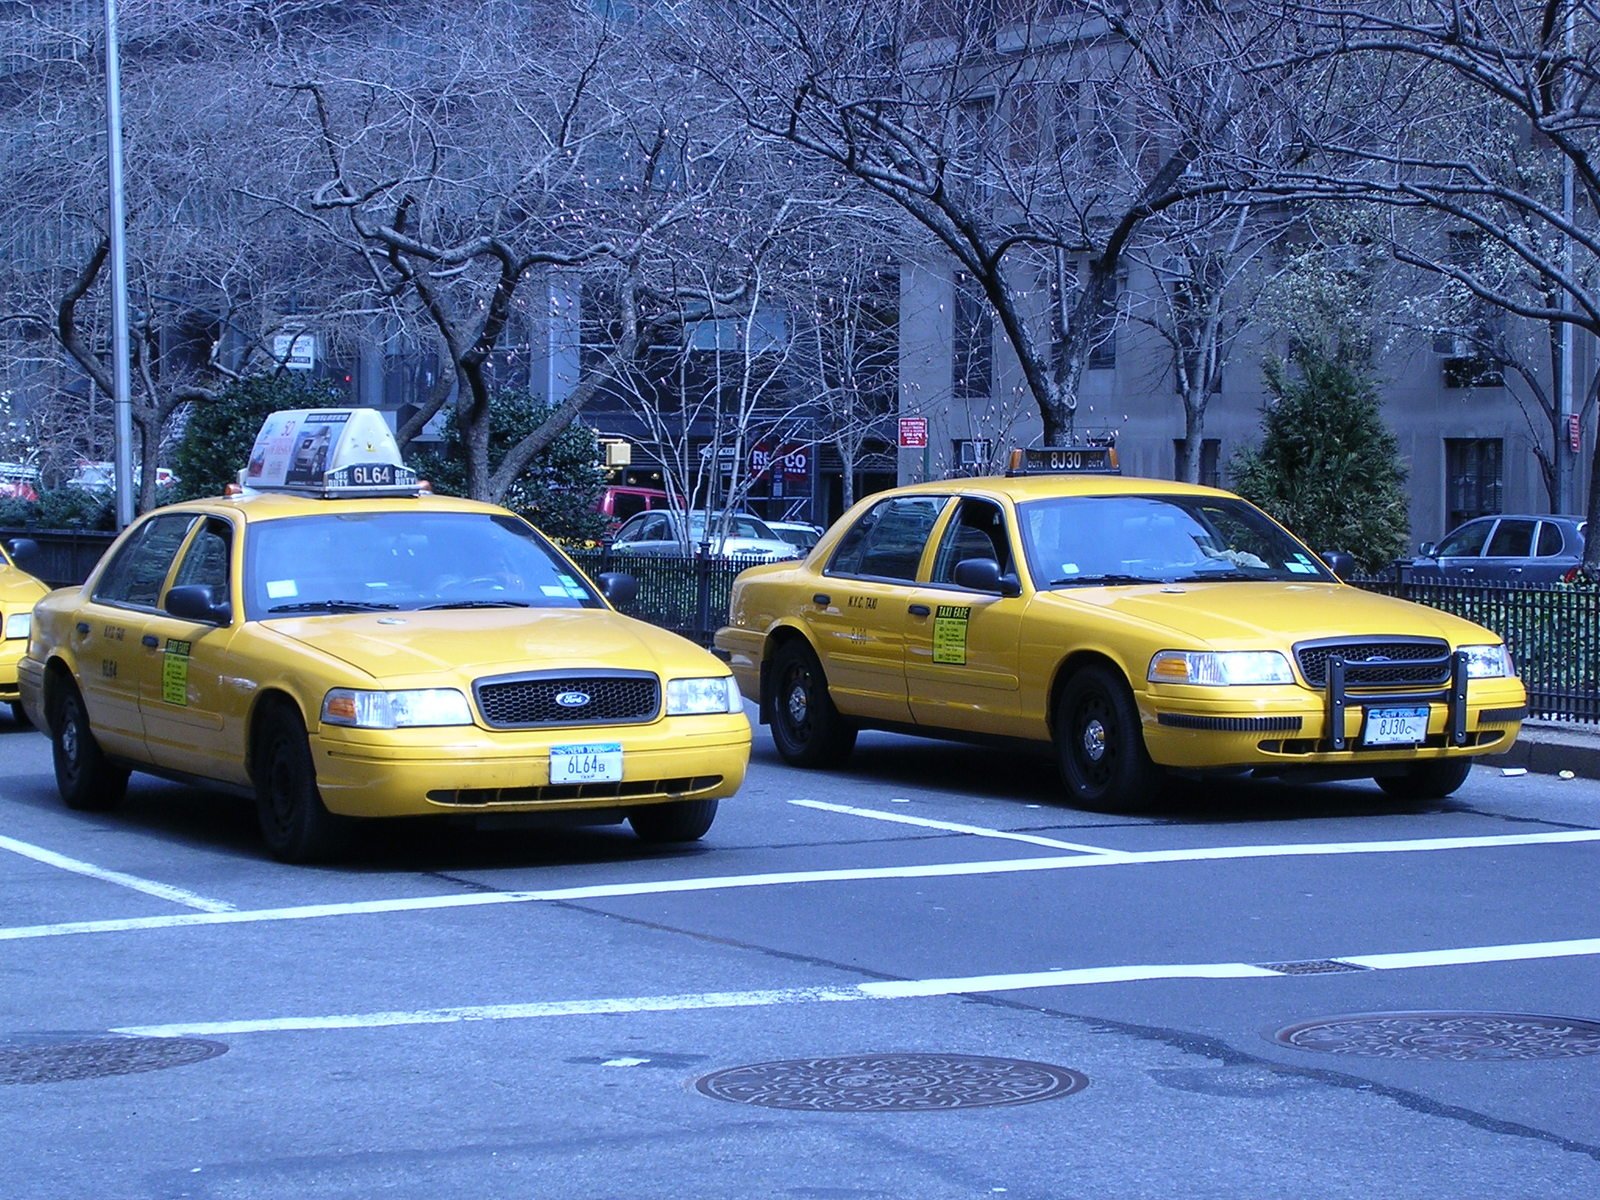 three taxi cabs are shown with the driver